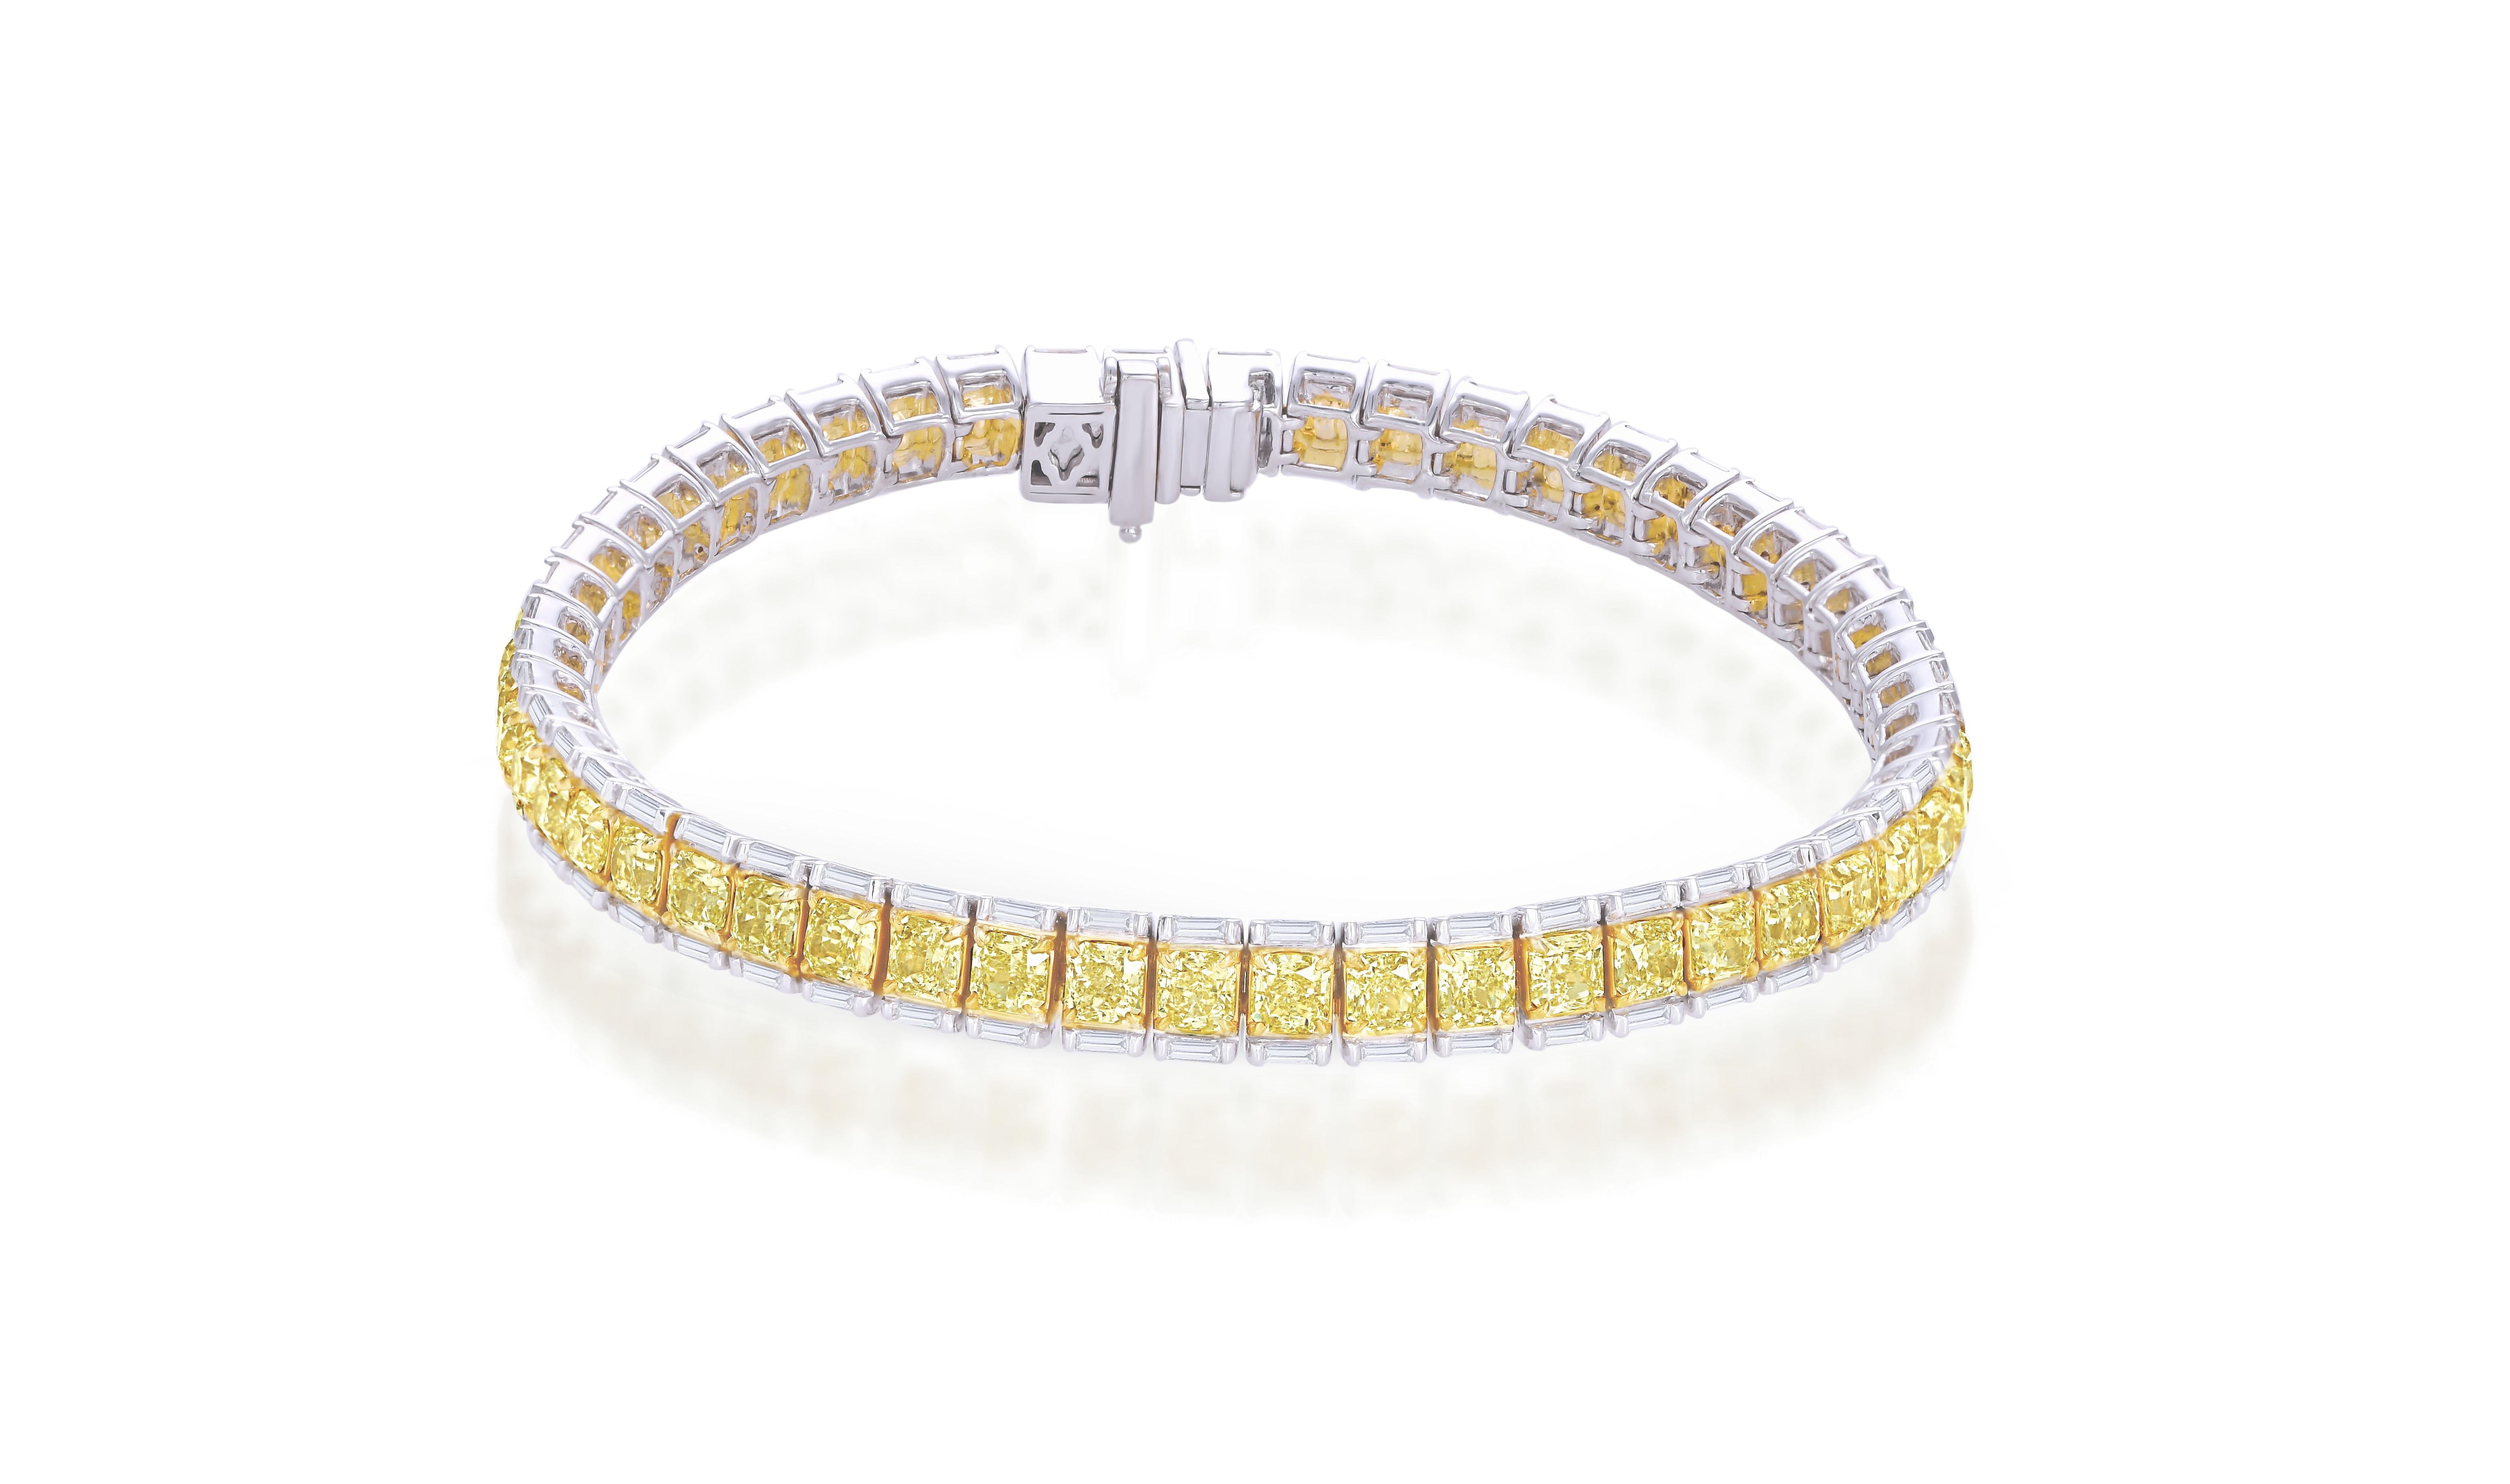 Luxurious tennis bracelet studded with perfectly crafted & calibrated yellow radiant natural diamonds. The yellow diamonds are flanked by matching white baguette diamond giving it a modern touch. Very flexible and perfect for all hands. 

Such